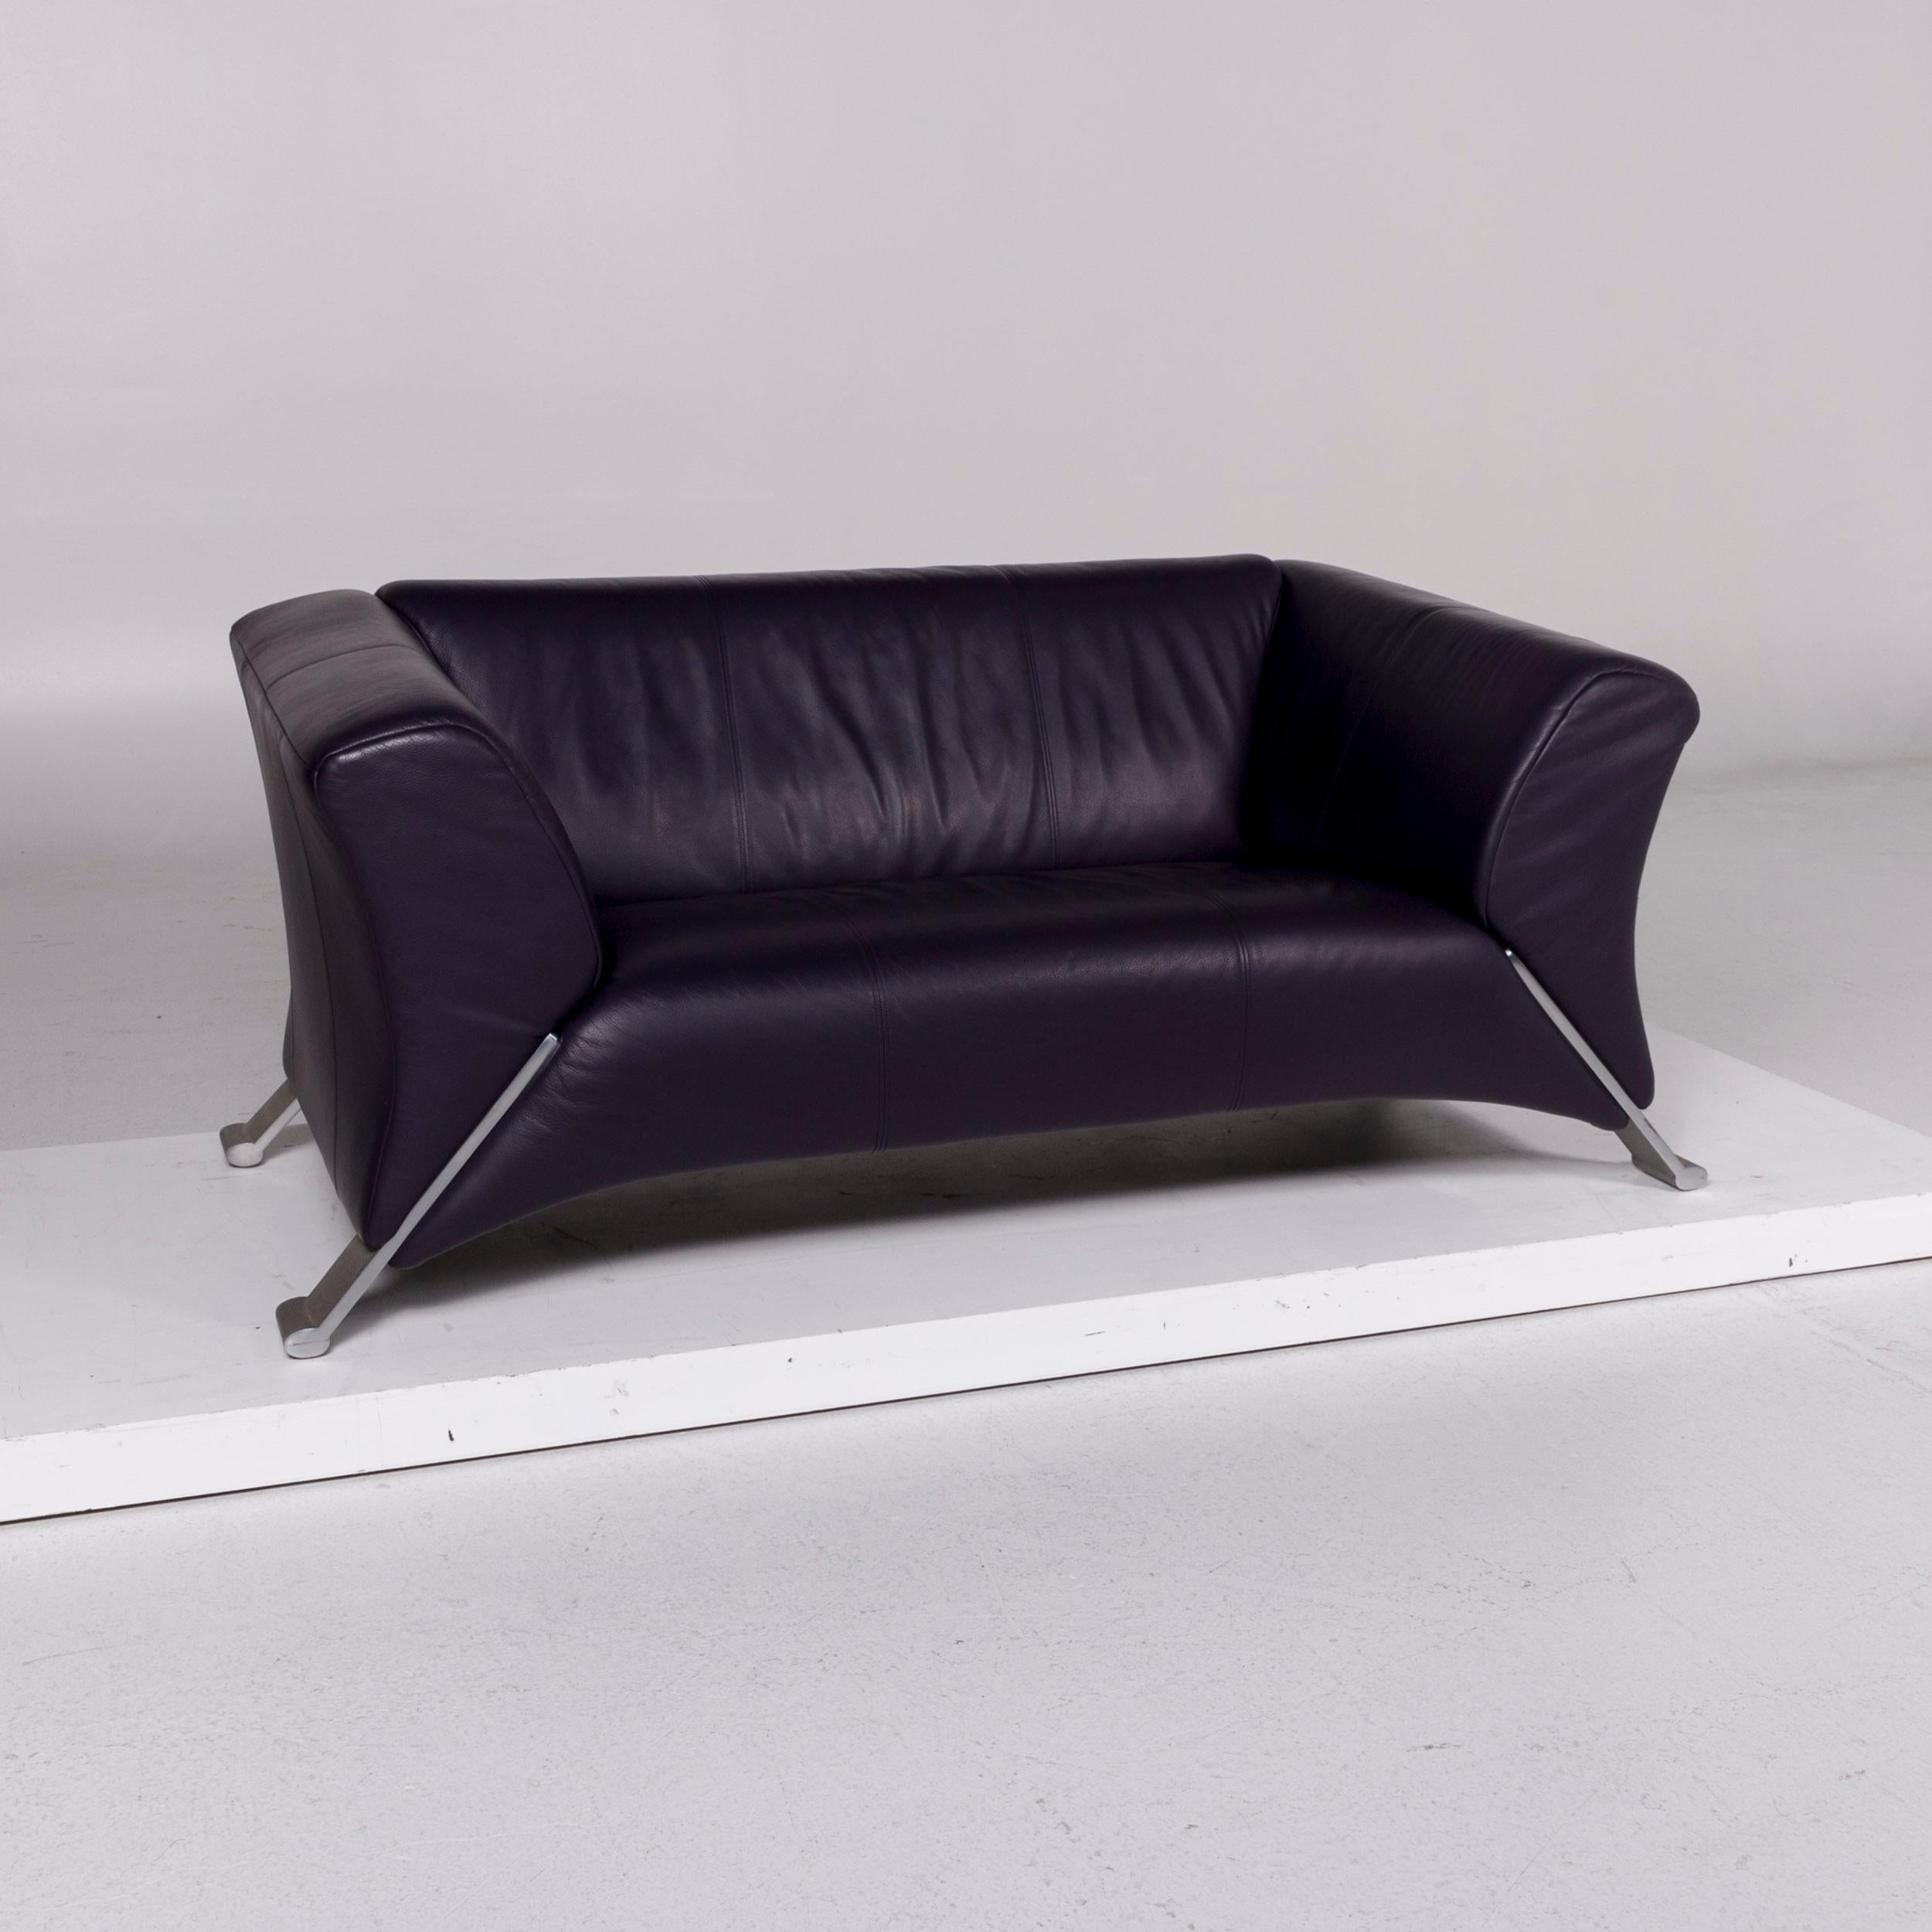 We bring to you a Rolf Benz 322 leather sofa violet two-seat couch.

Product measurements in centimeters:

Depth 91
Width 168
Height 71
Seat-height 39
Rest-height 69
Seat-depth 59
Seat-width 101
Back-height 35.
  